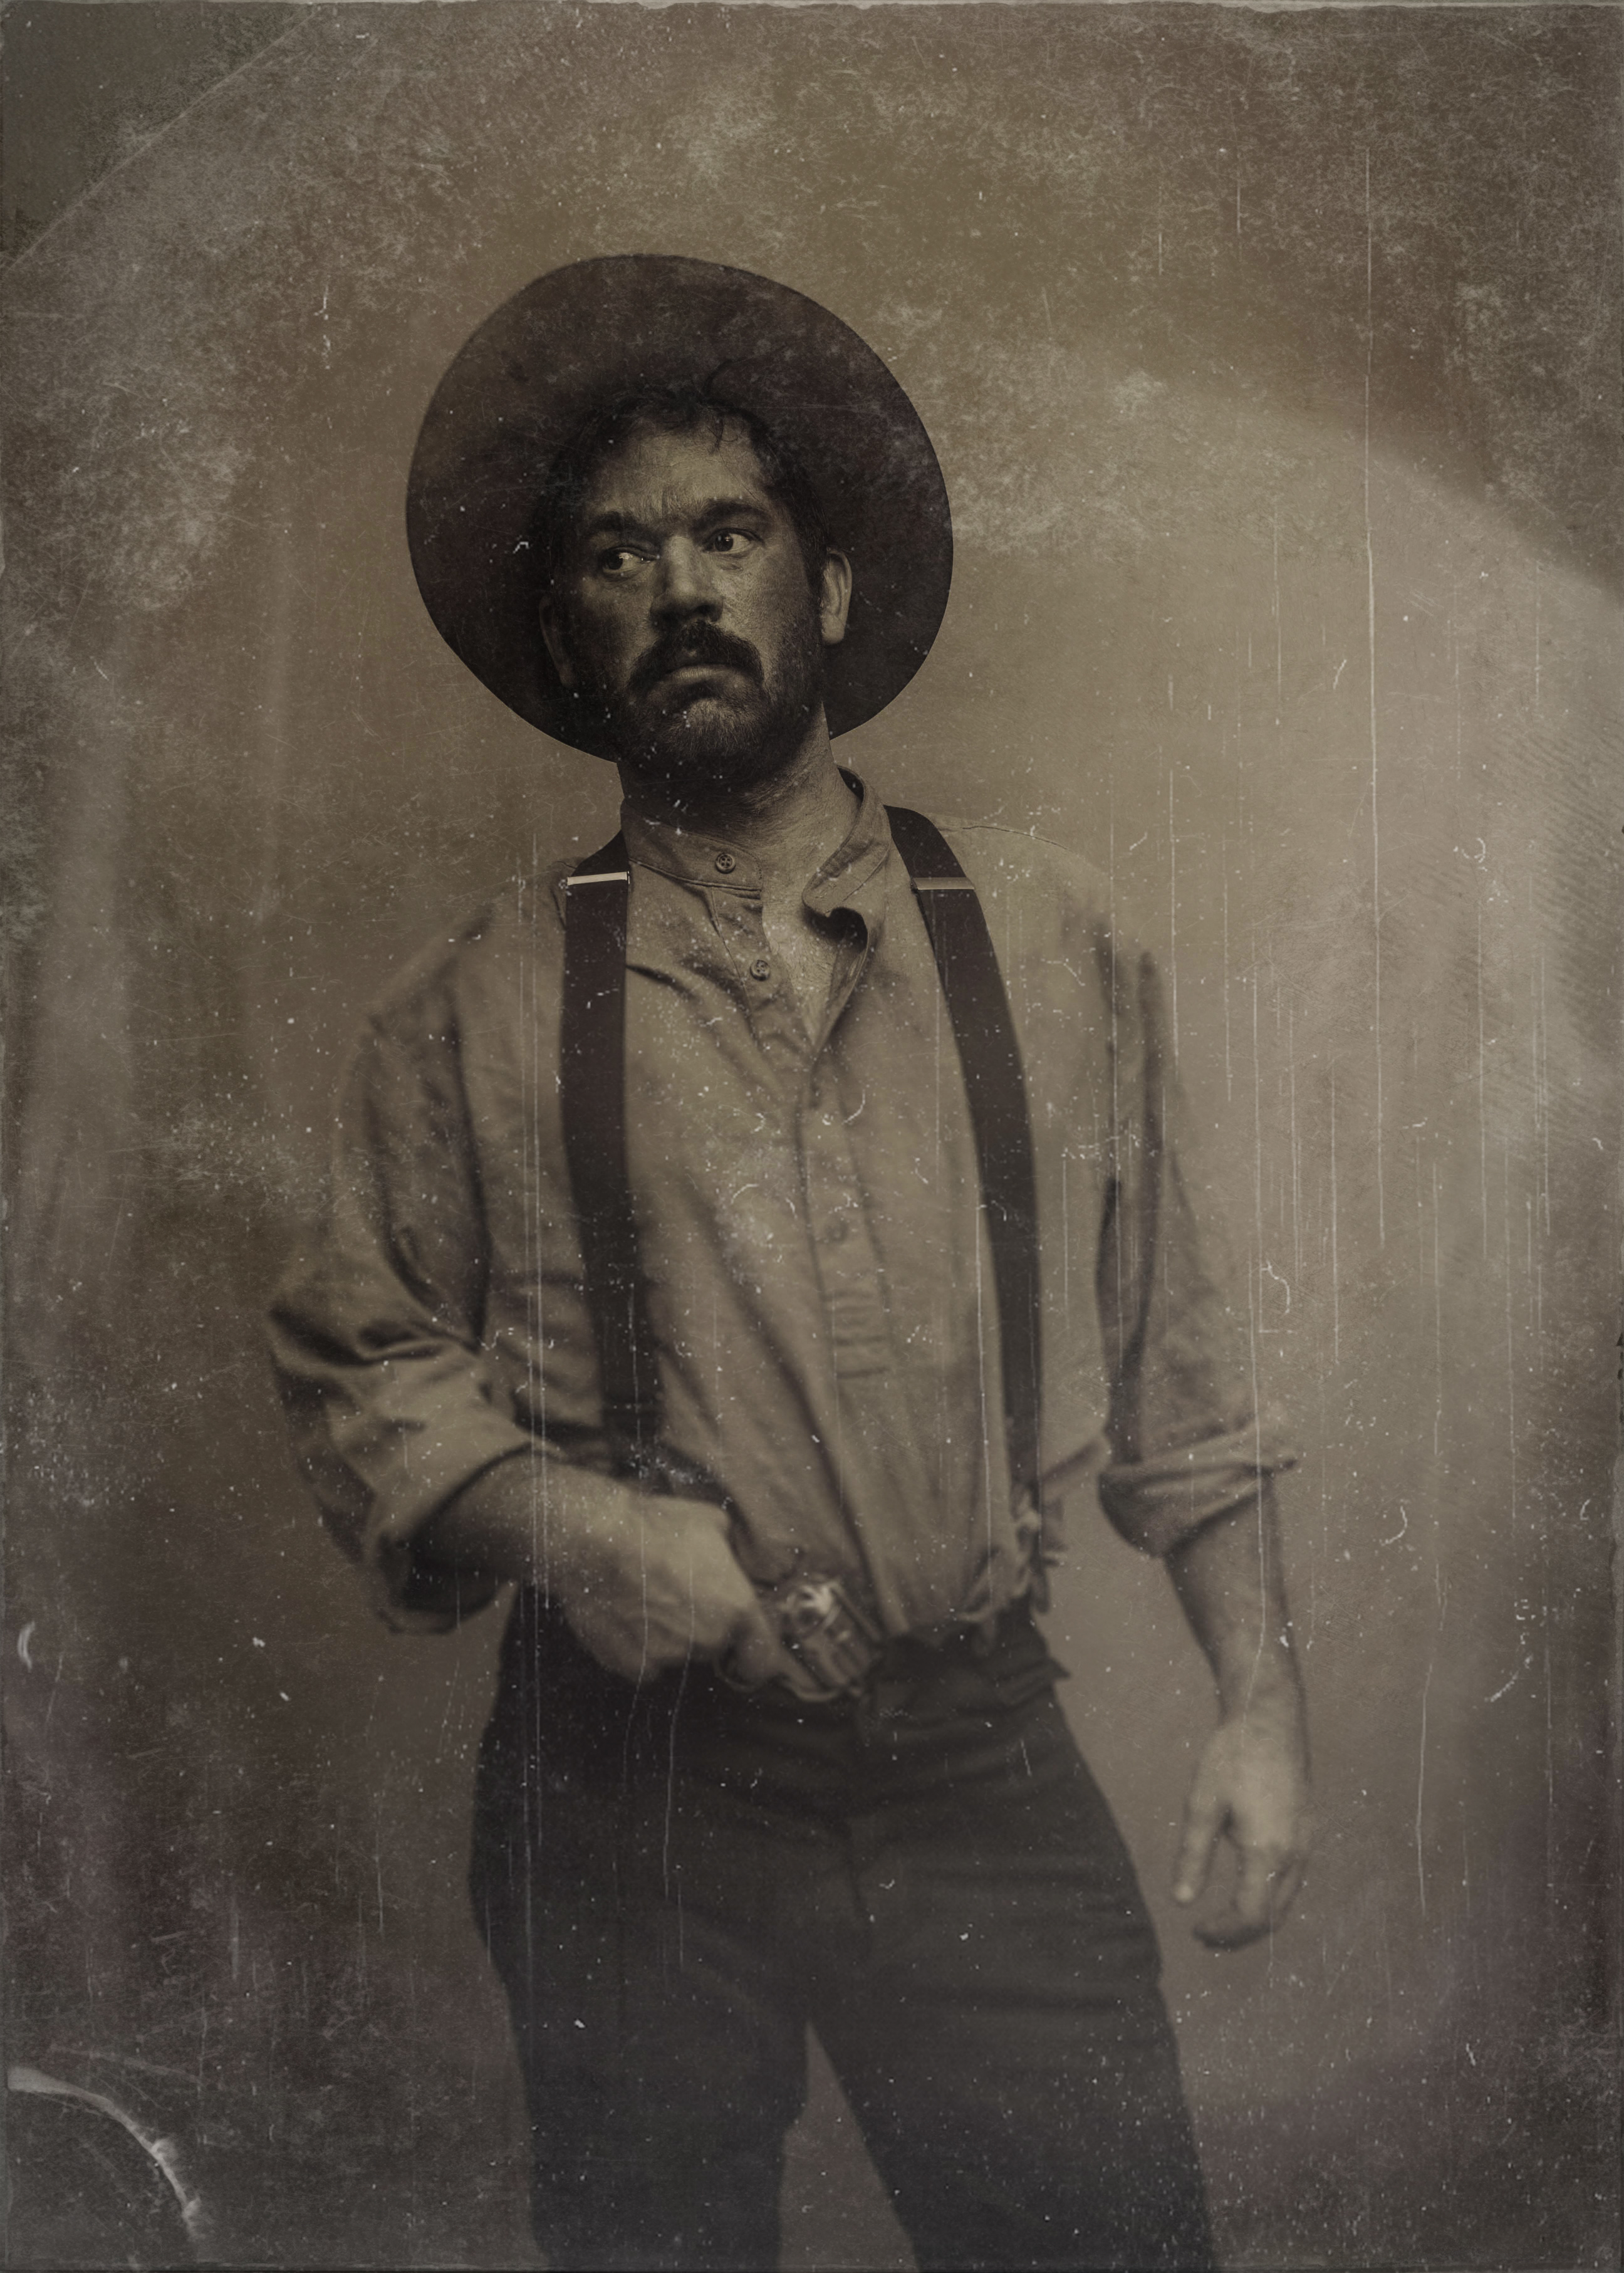 From the 2014 Western Film 